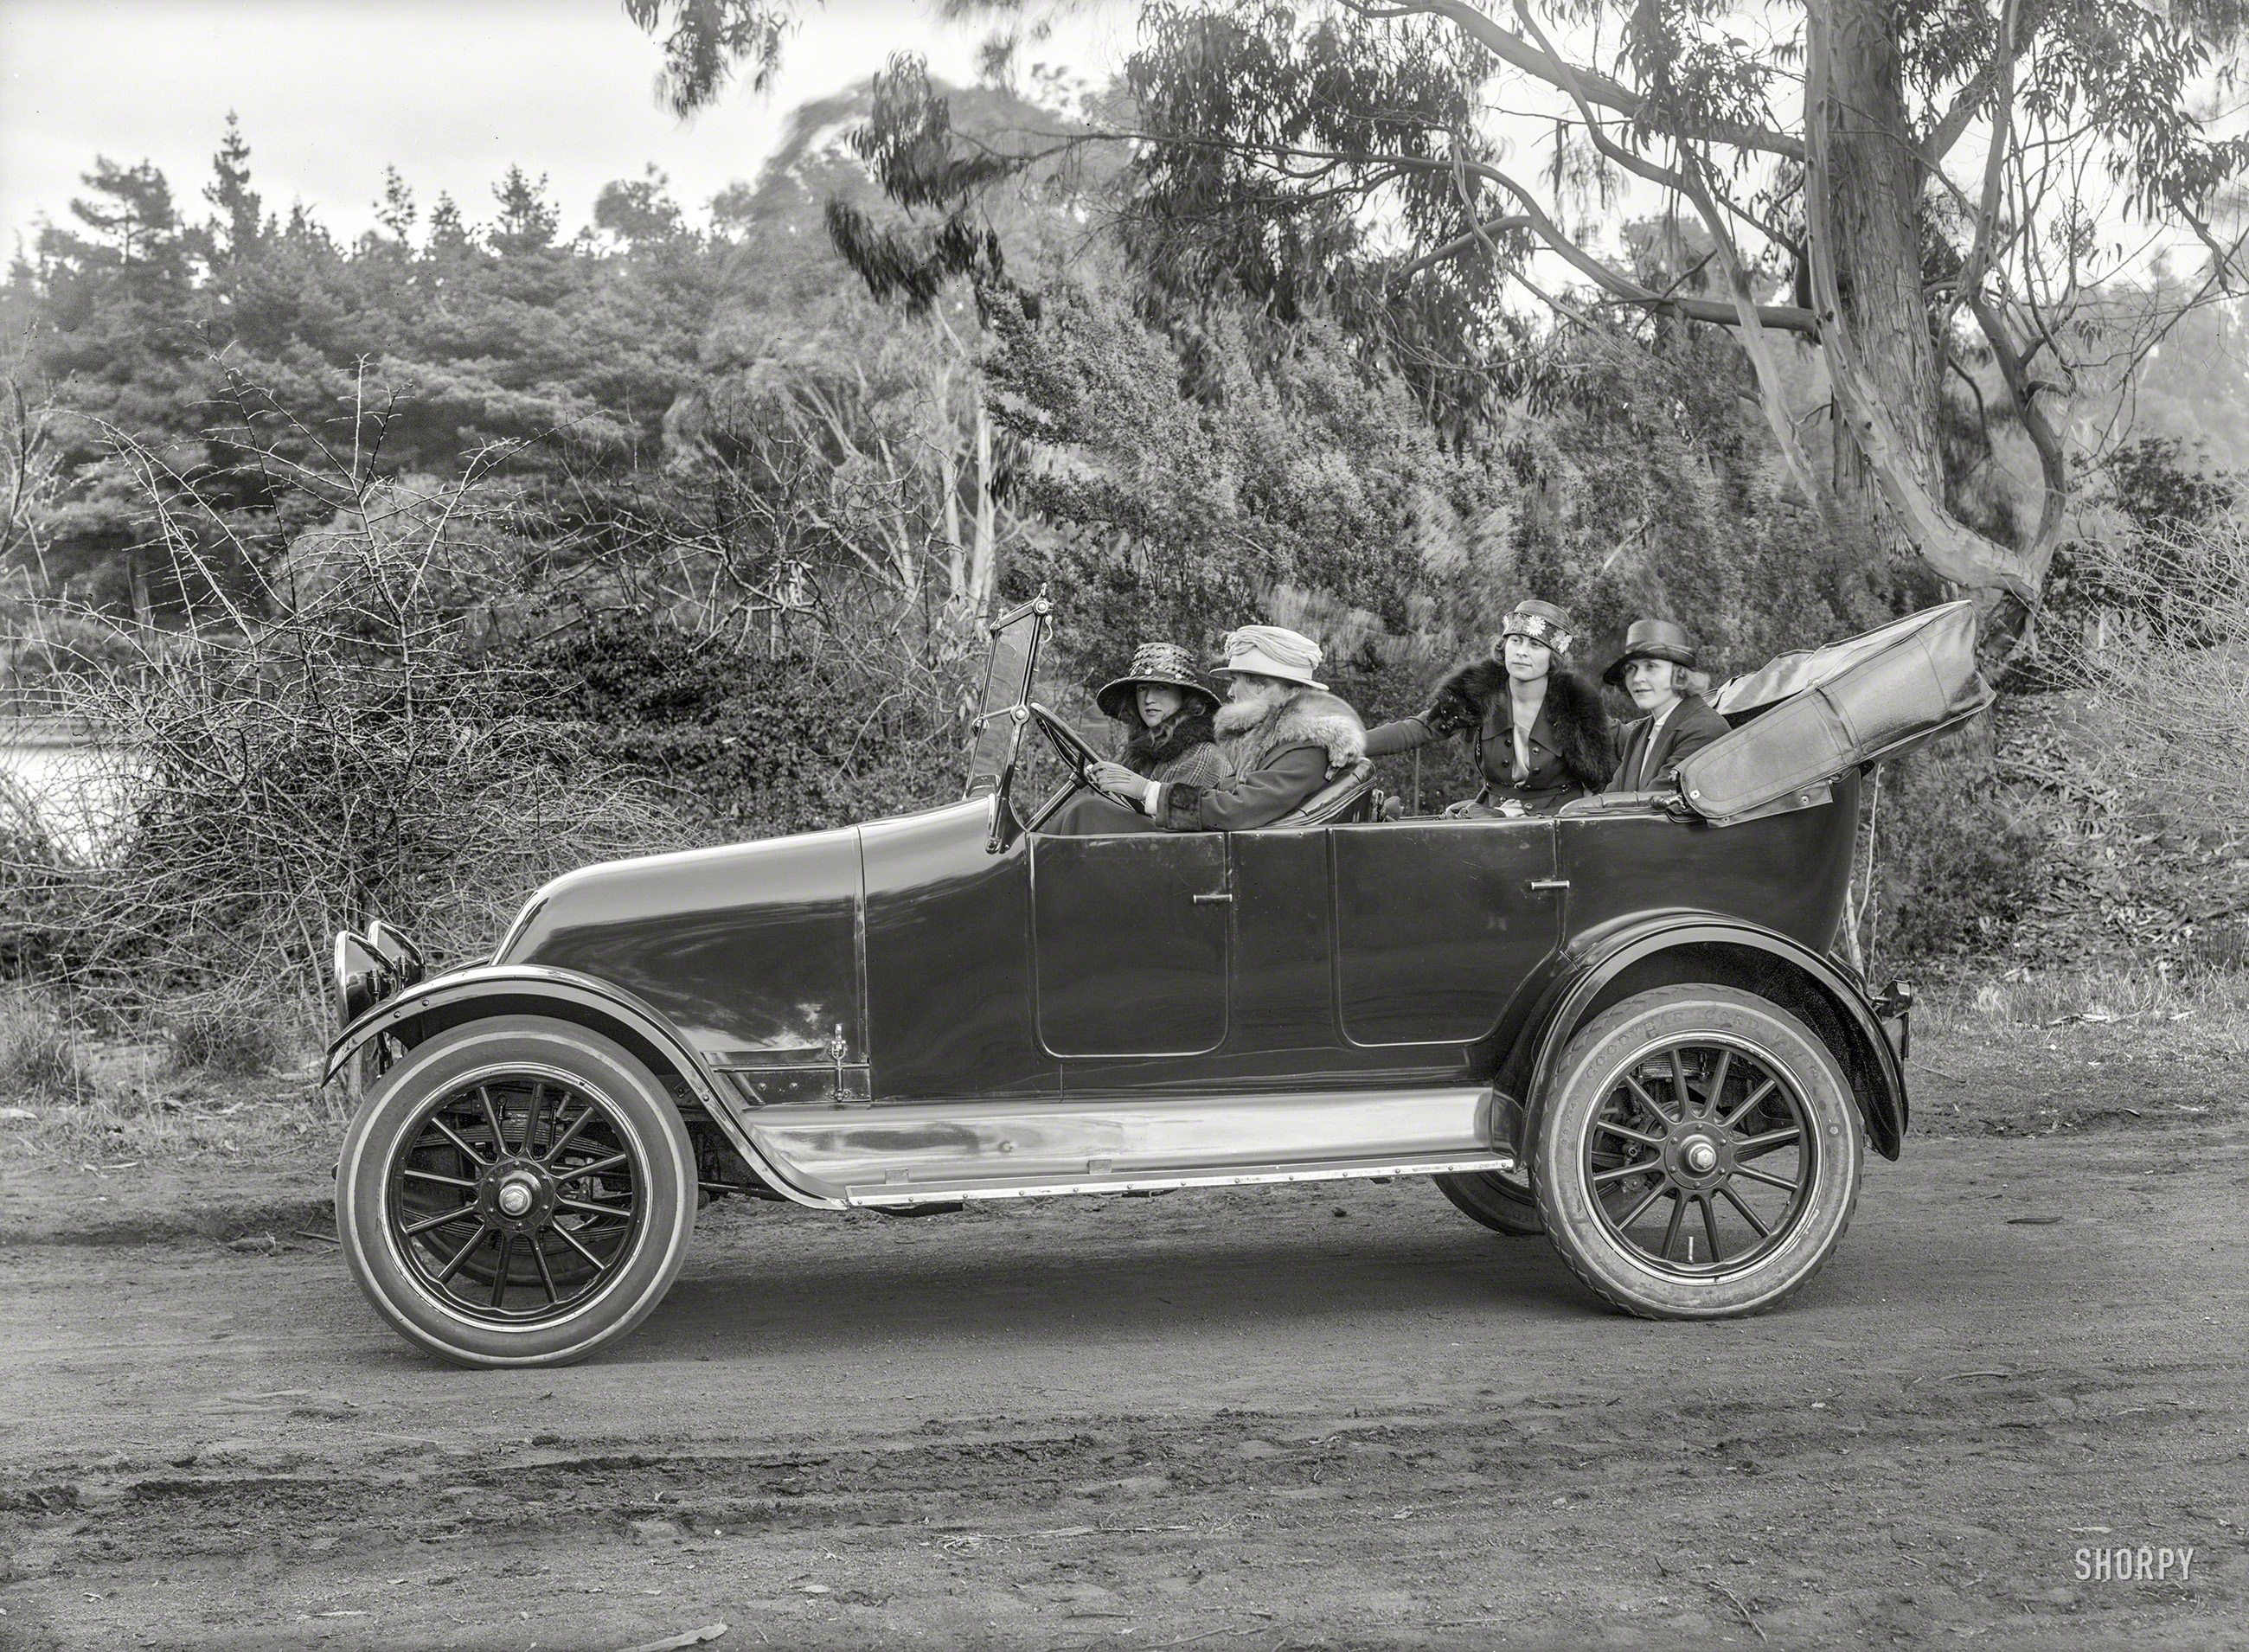 &nbsp; &nbsp; &nbsp; &nbsp; "After a fortnight in the wilds, we return with many pelts."

San Francisco circa 1919. "Franklin touring car." The versatile conveyance suitable for pillage or village. 5x7 glass negative by Christopher Helin. View full size.